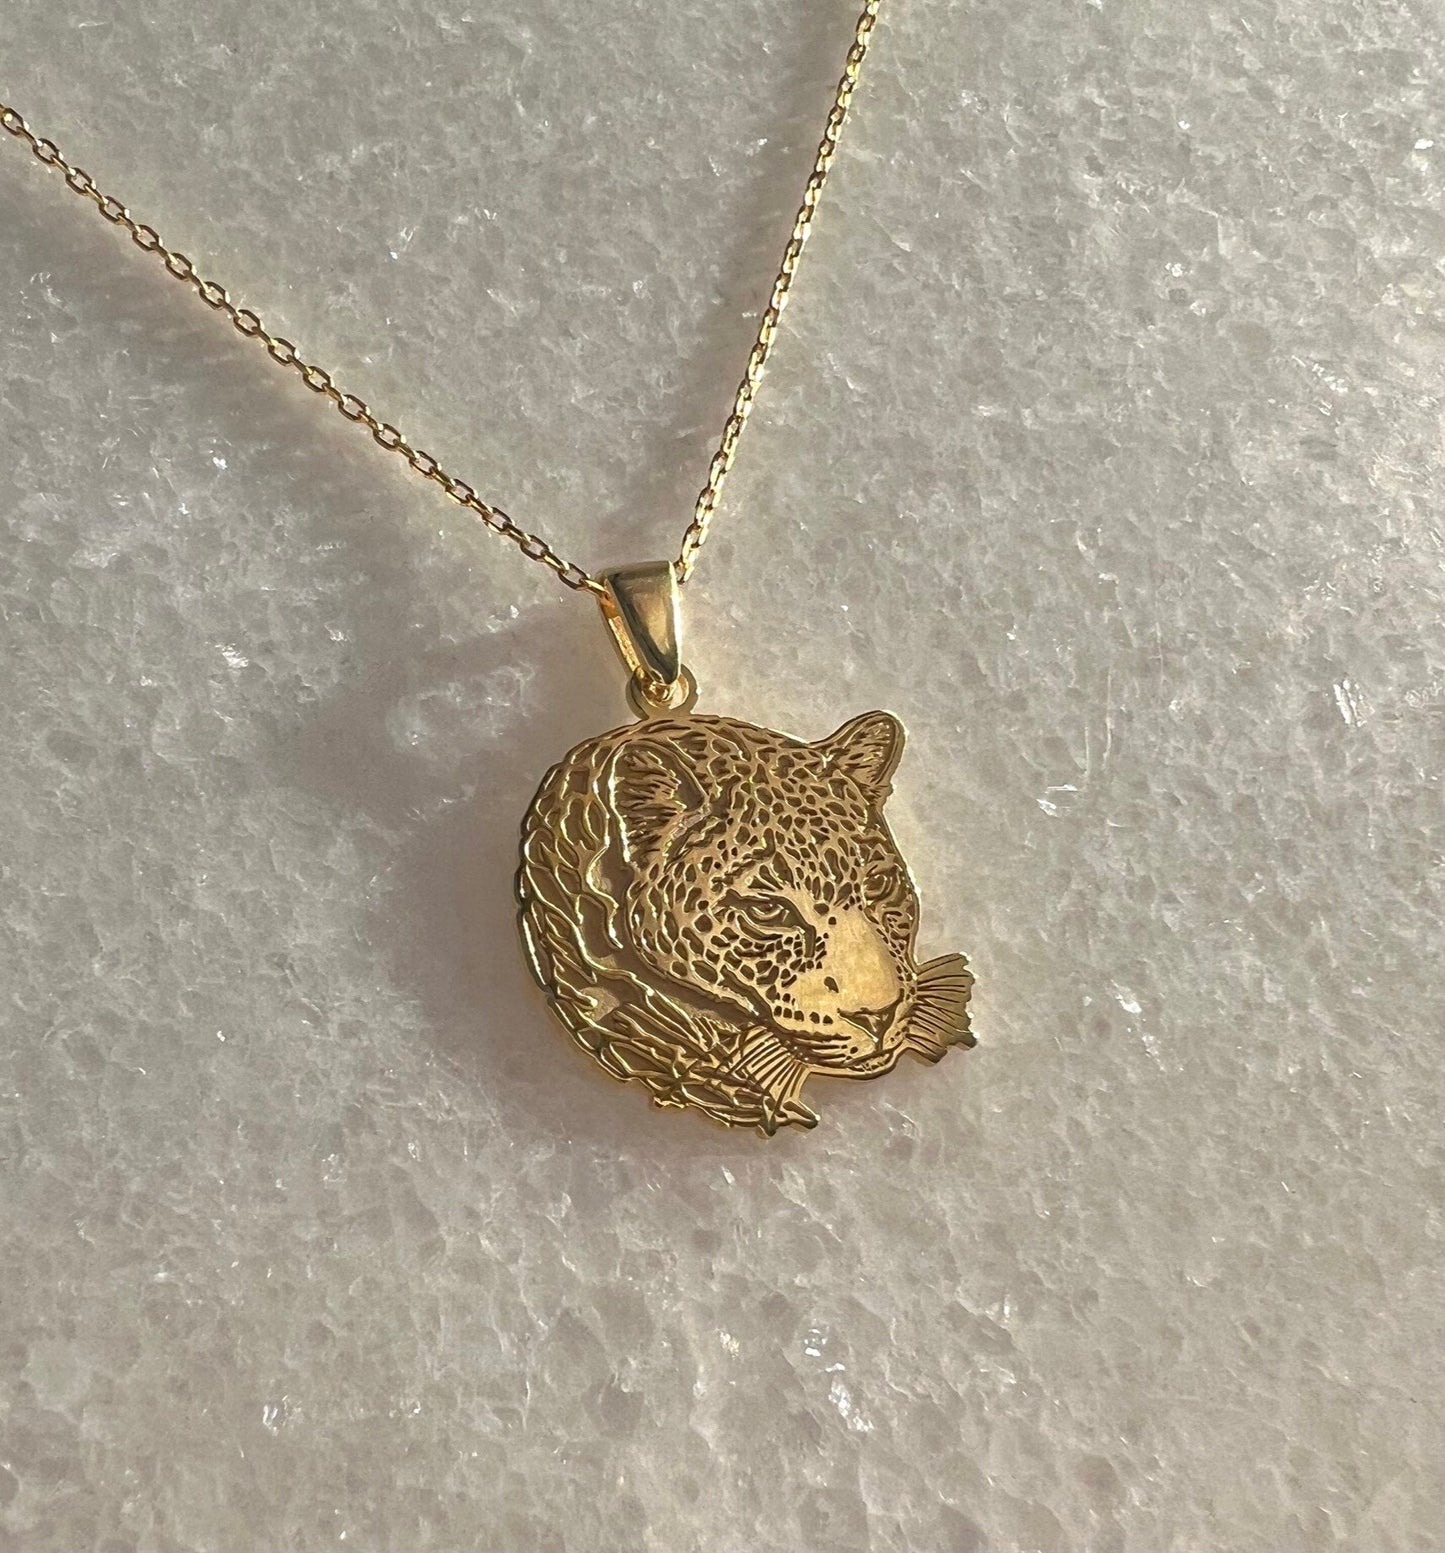 Tiger Necklace - 925 Sterling Silver Necklace - Tiger Jewelry - Animal Jewelry - Unisex Necklace